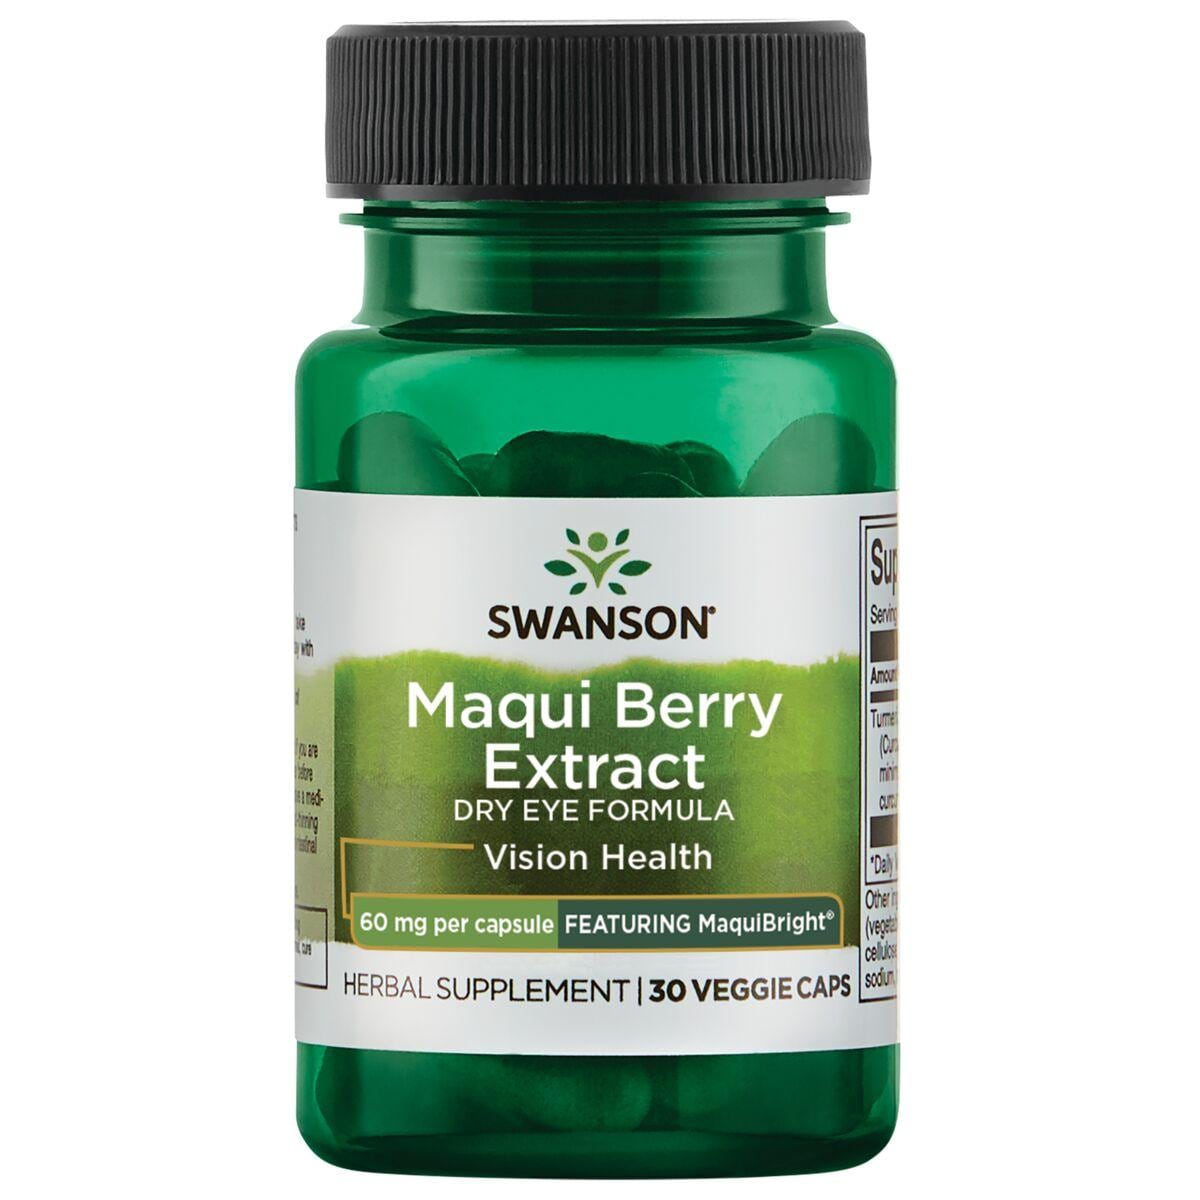 Swanson Ultra Maqui Berry Extract Dry Eye Formula - Featuring Maquibright Vitamin | 60 mg | 30 Veg Caps | Herbs and Supplements